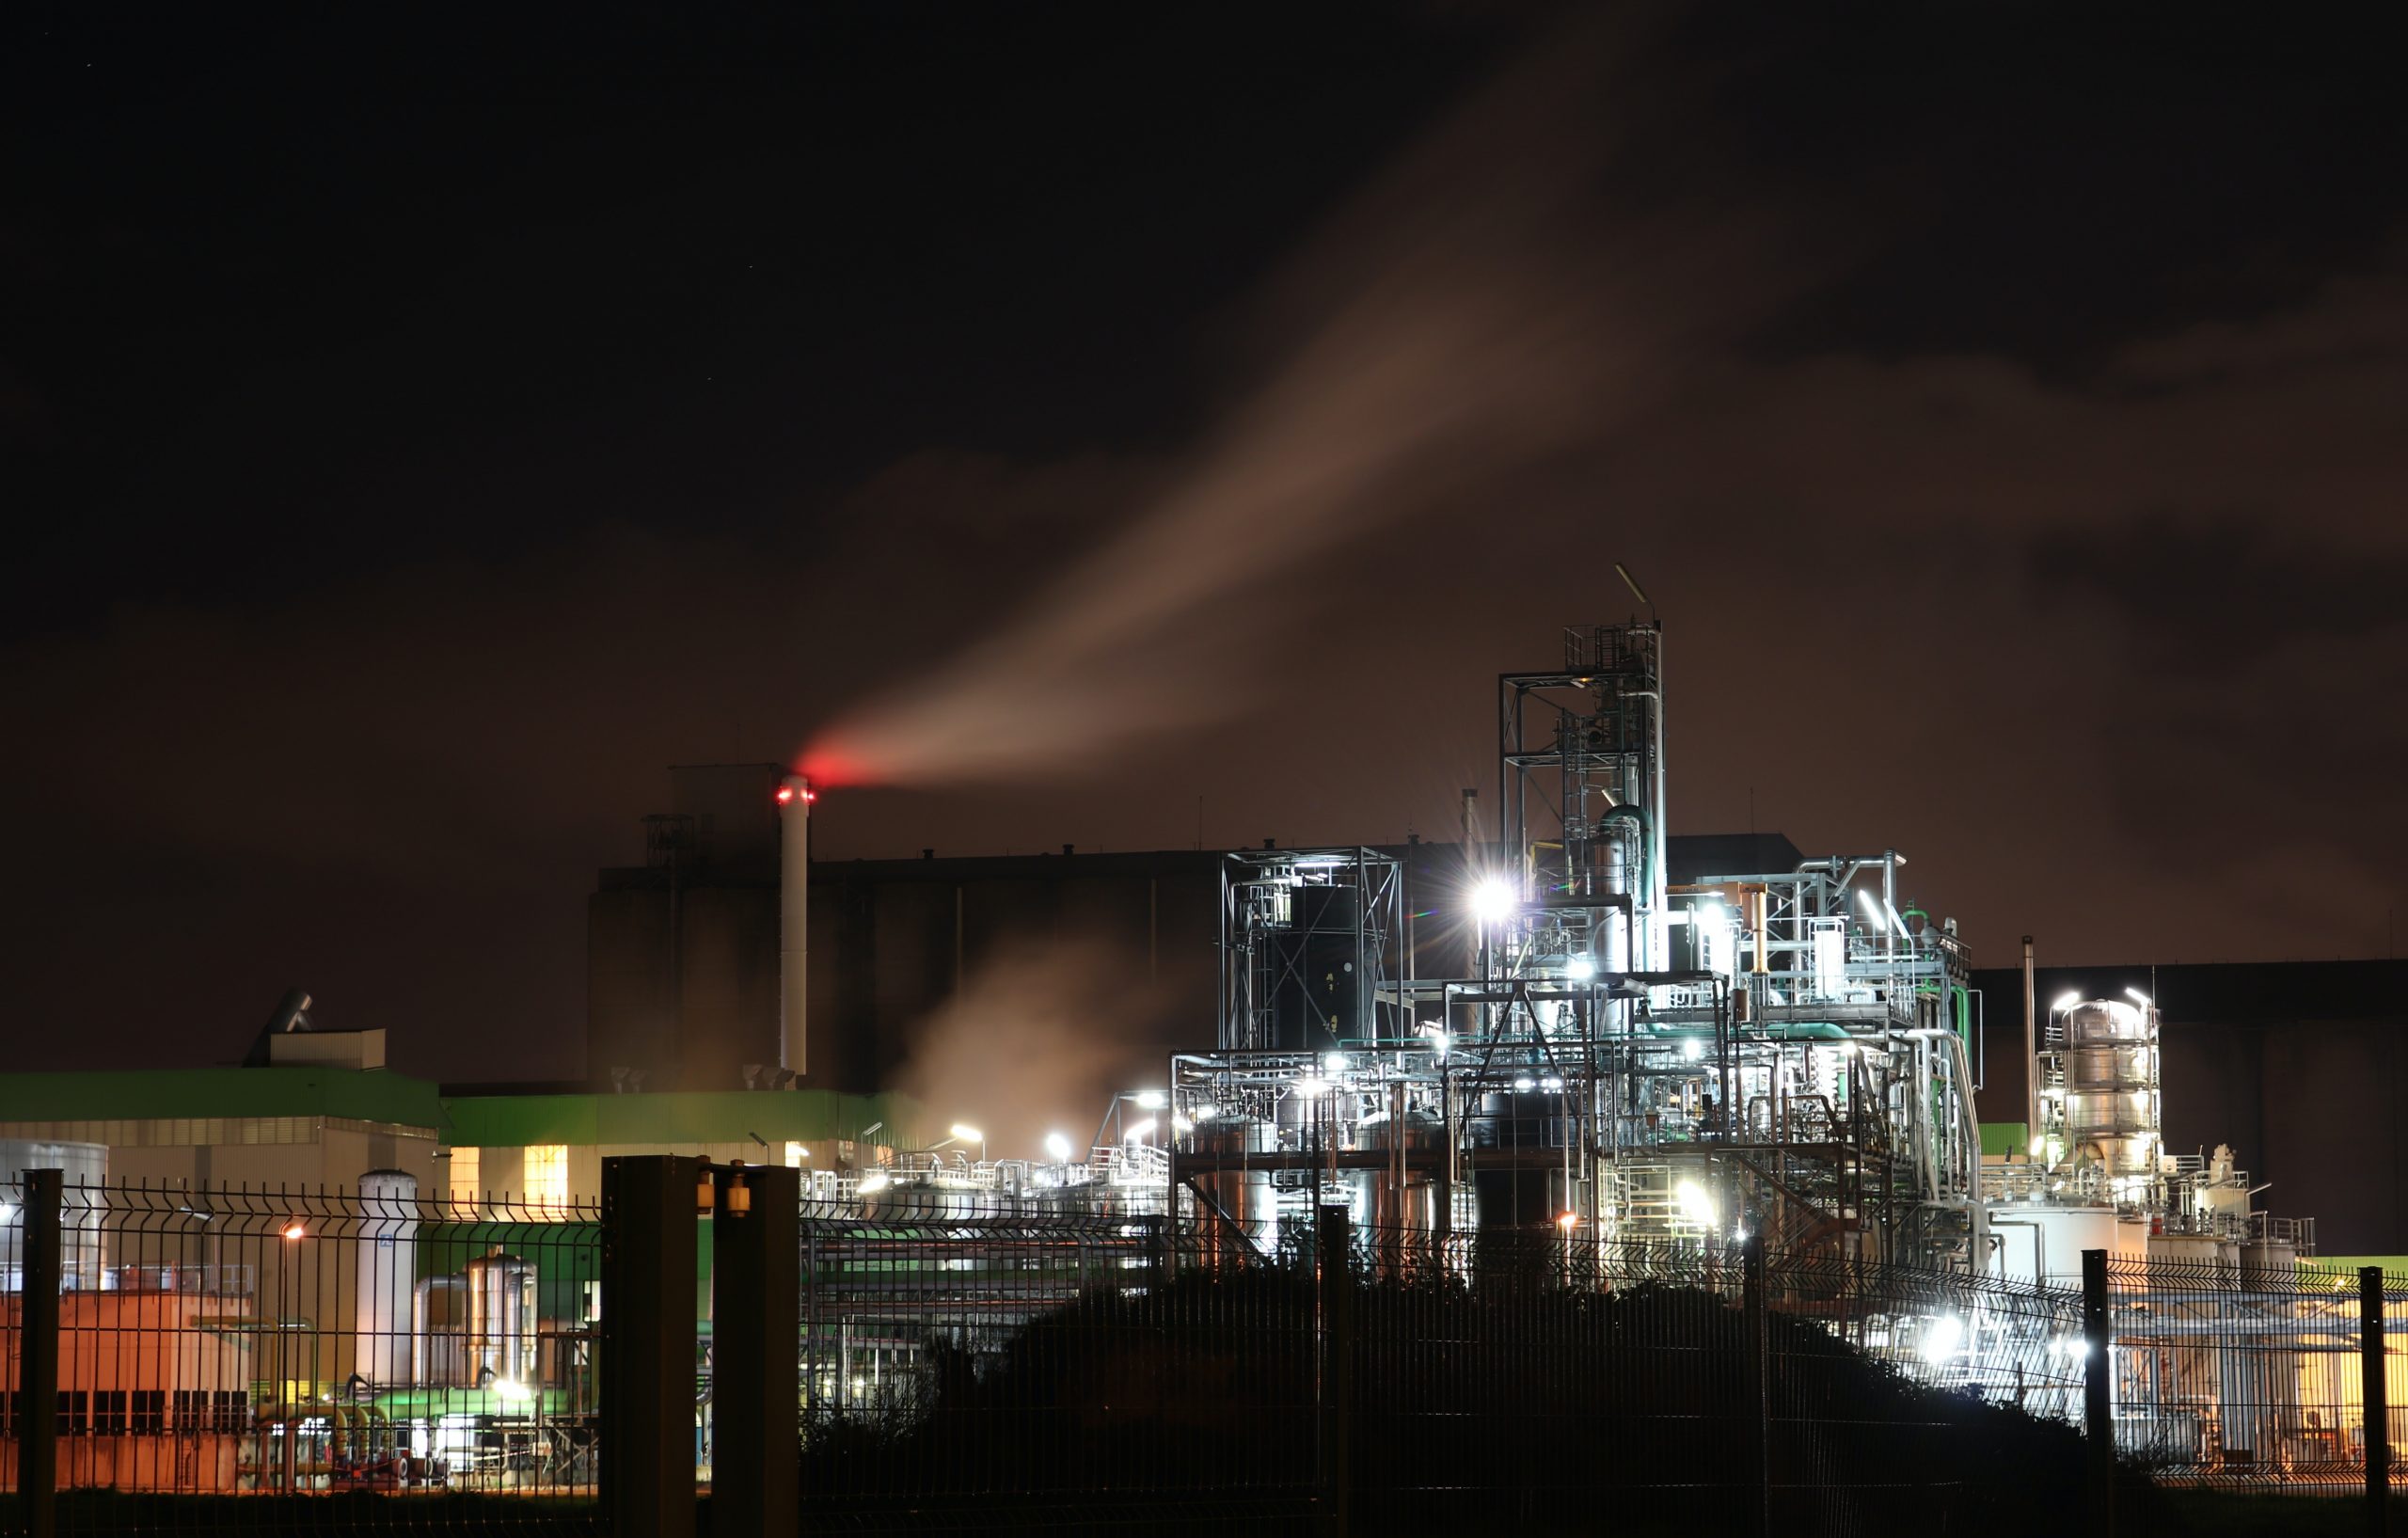 Deep Data Analysis for Quality Improvement
Photo by Loïc Manegarium: https://www.pexels.com/photo/industrial-building-at-night-6045858/